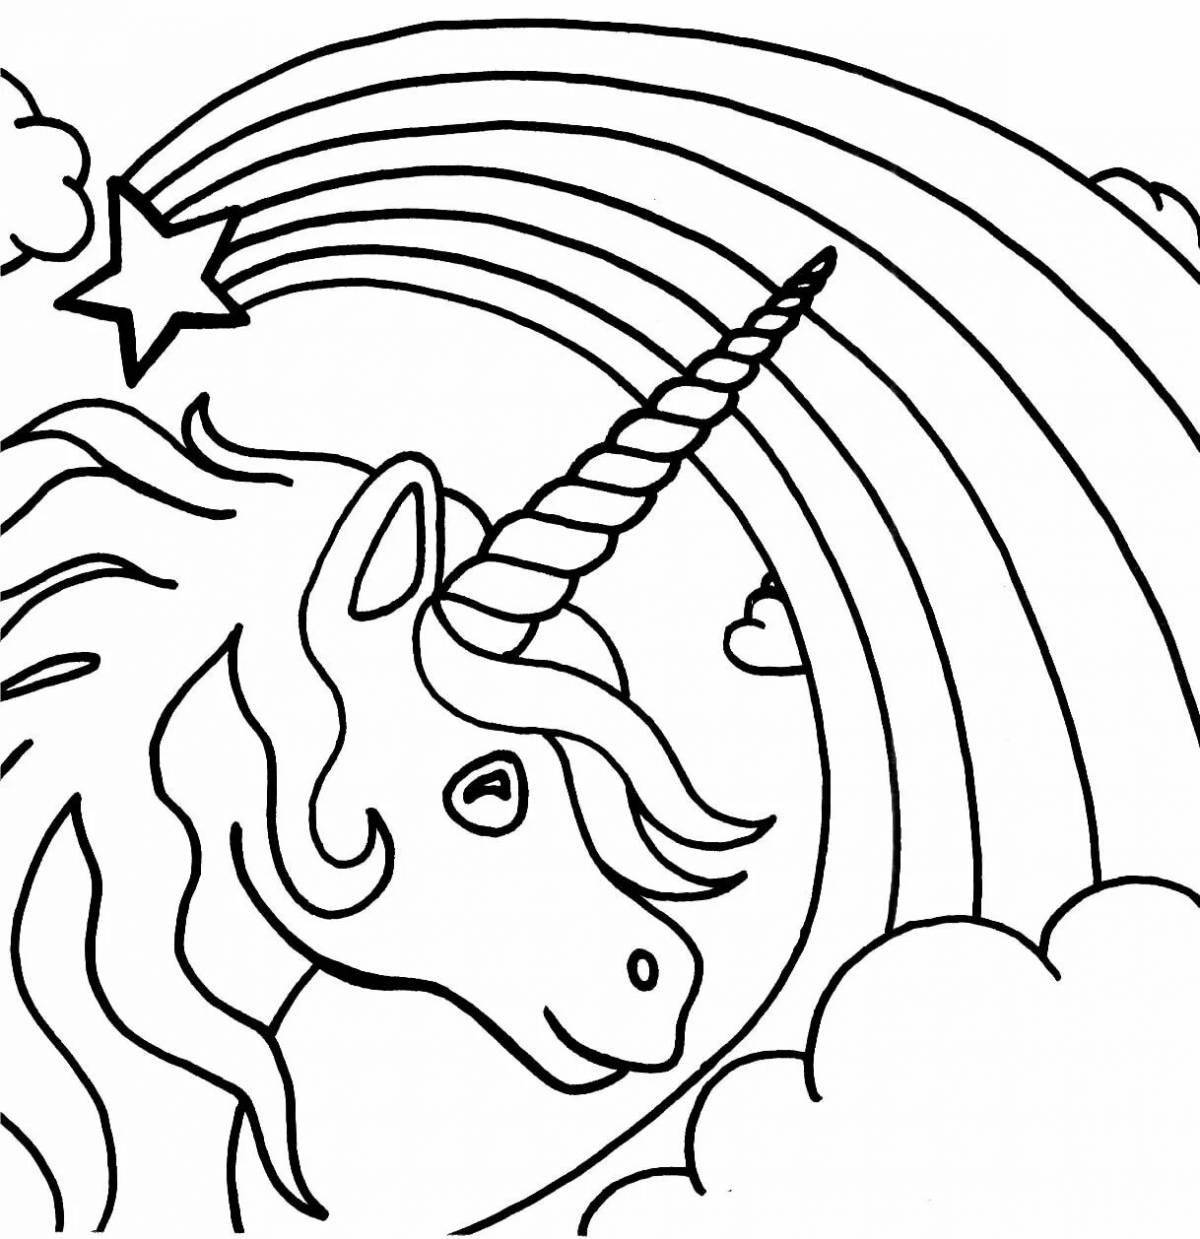 Playful coloring unicorn with rainbow